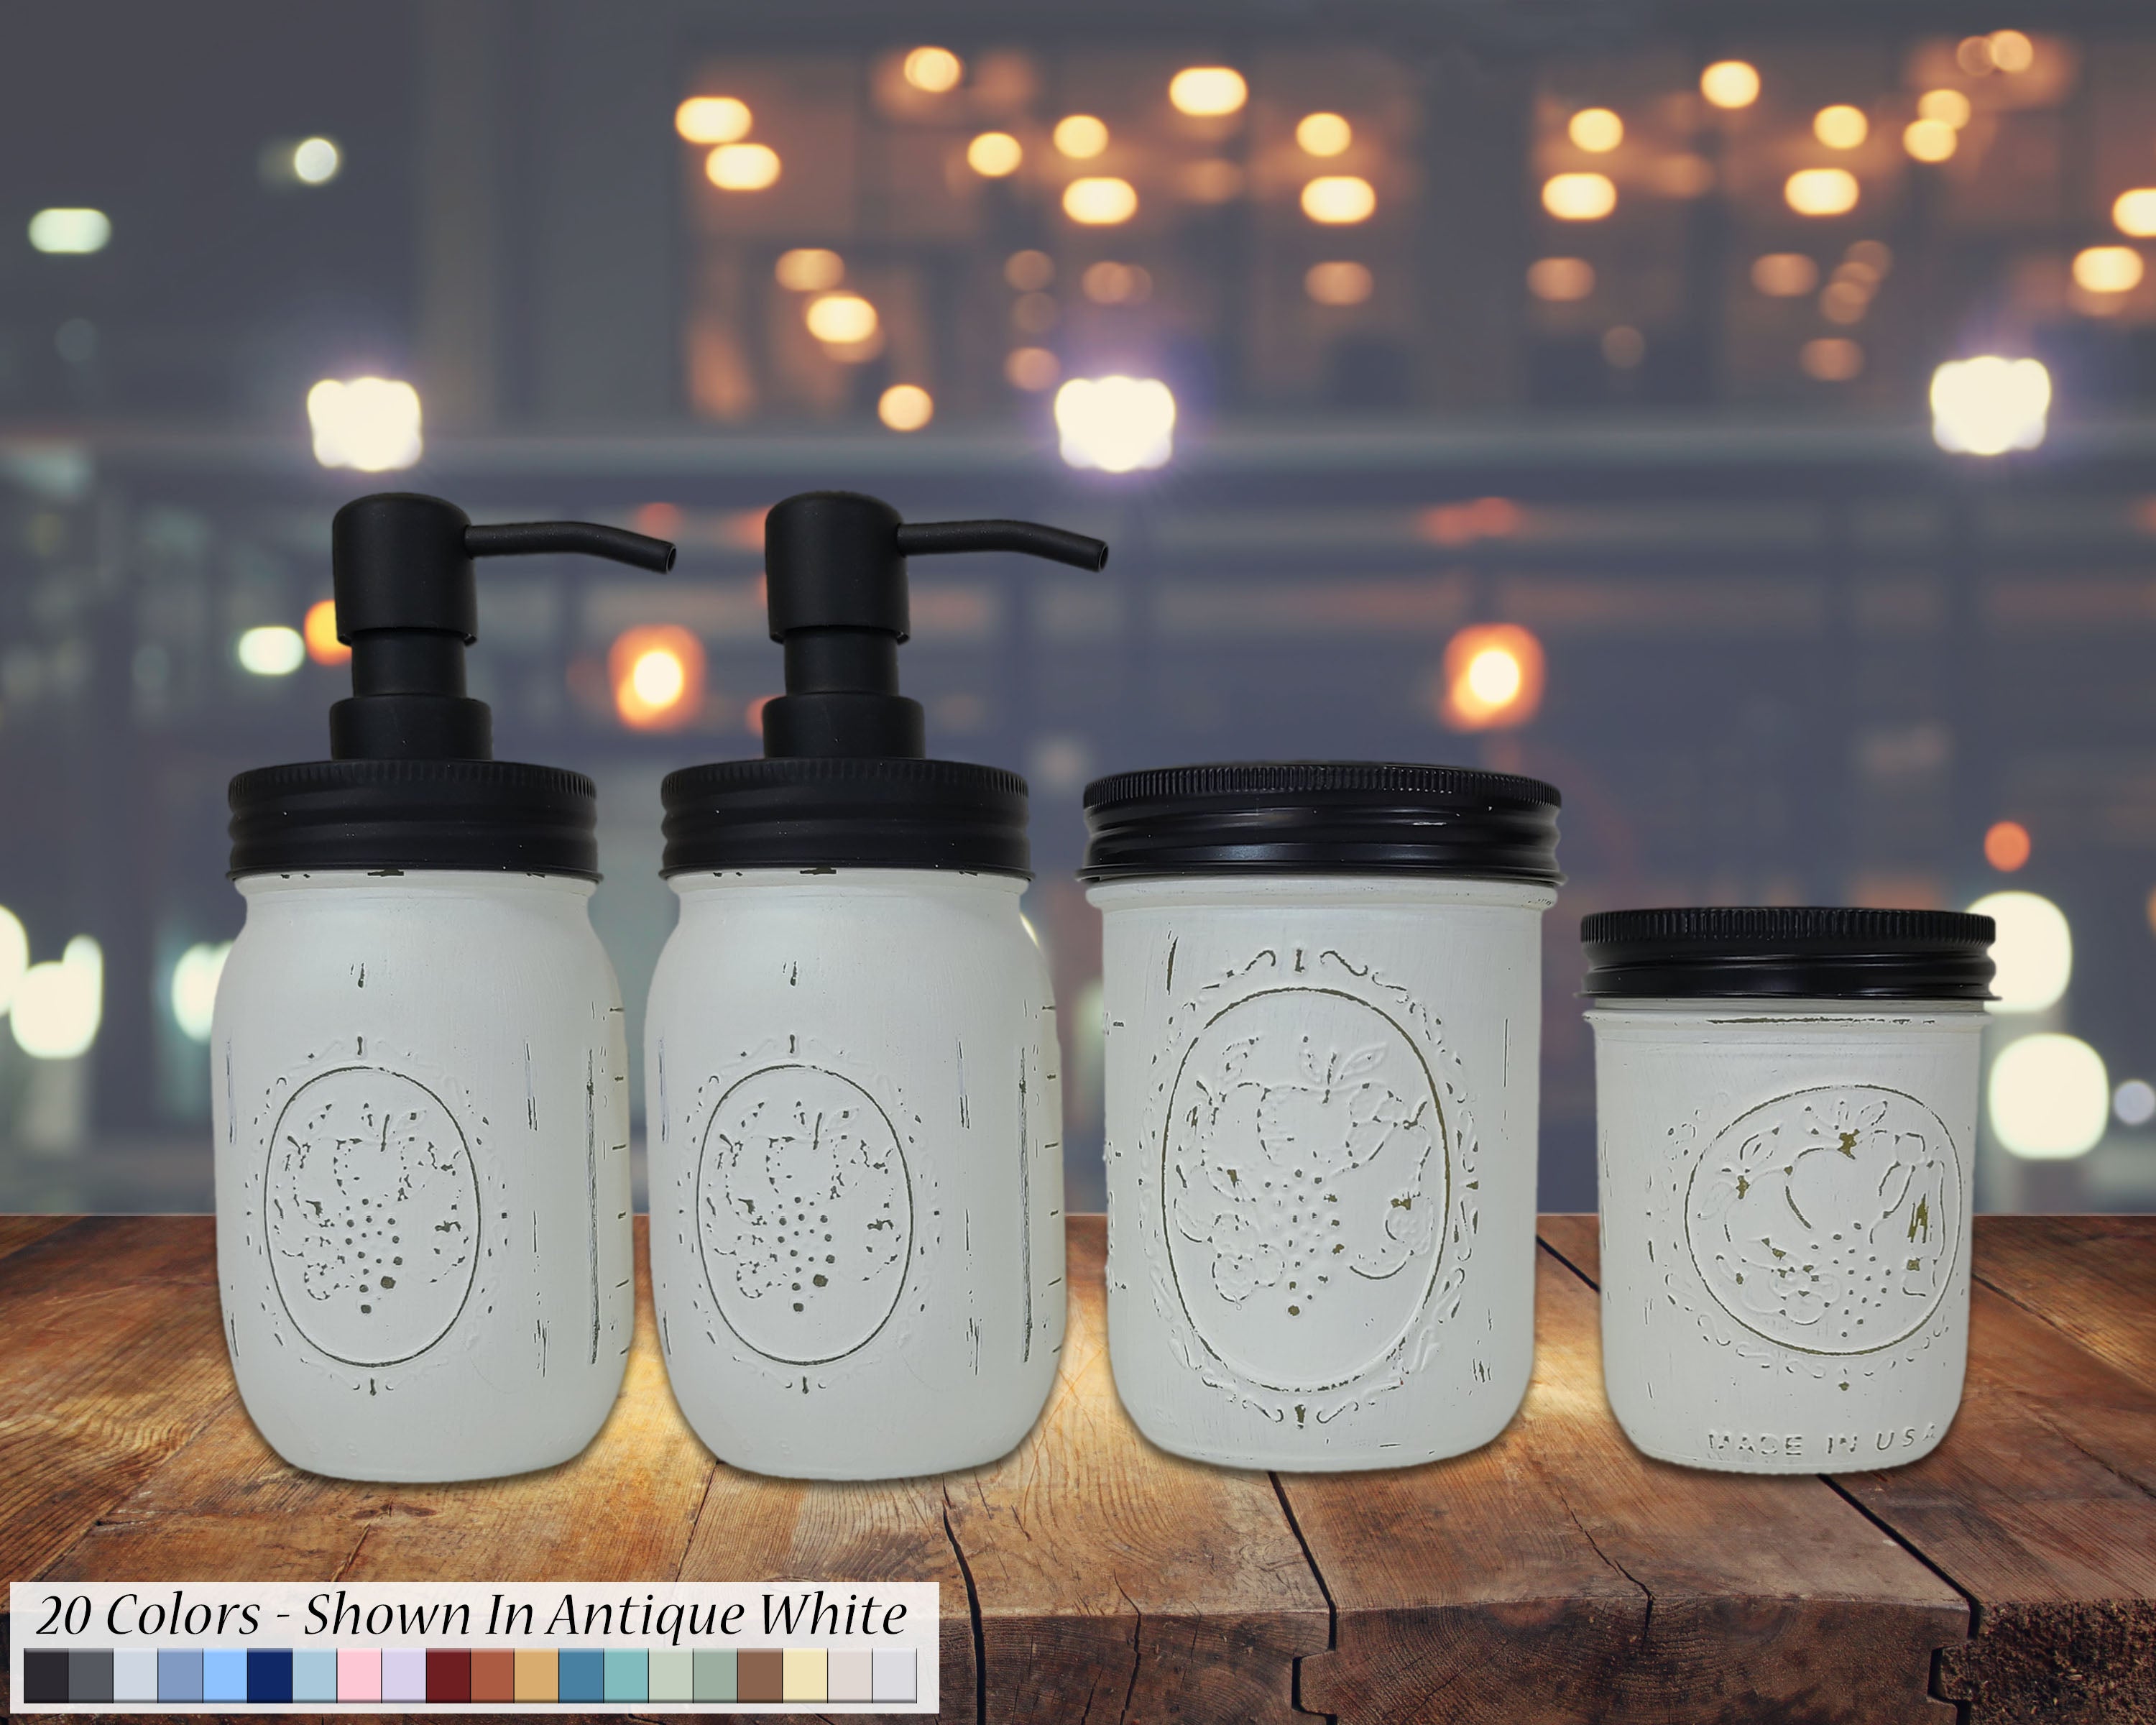 Custom Painted Mason Jar Bathroom Sets, Shown in Antique White with Black Lids